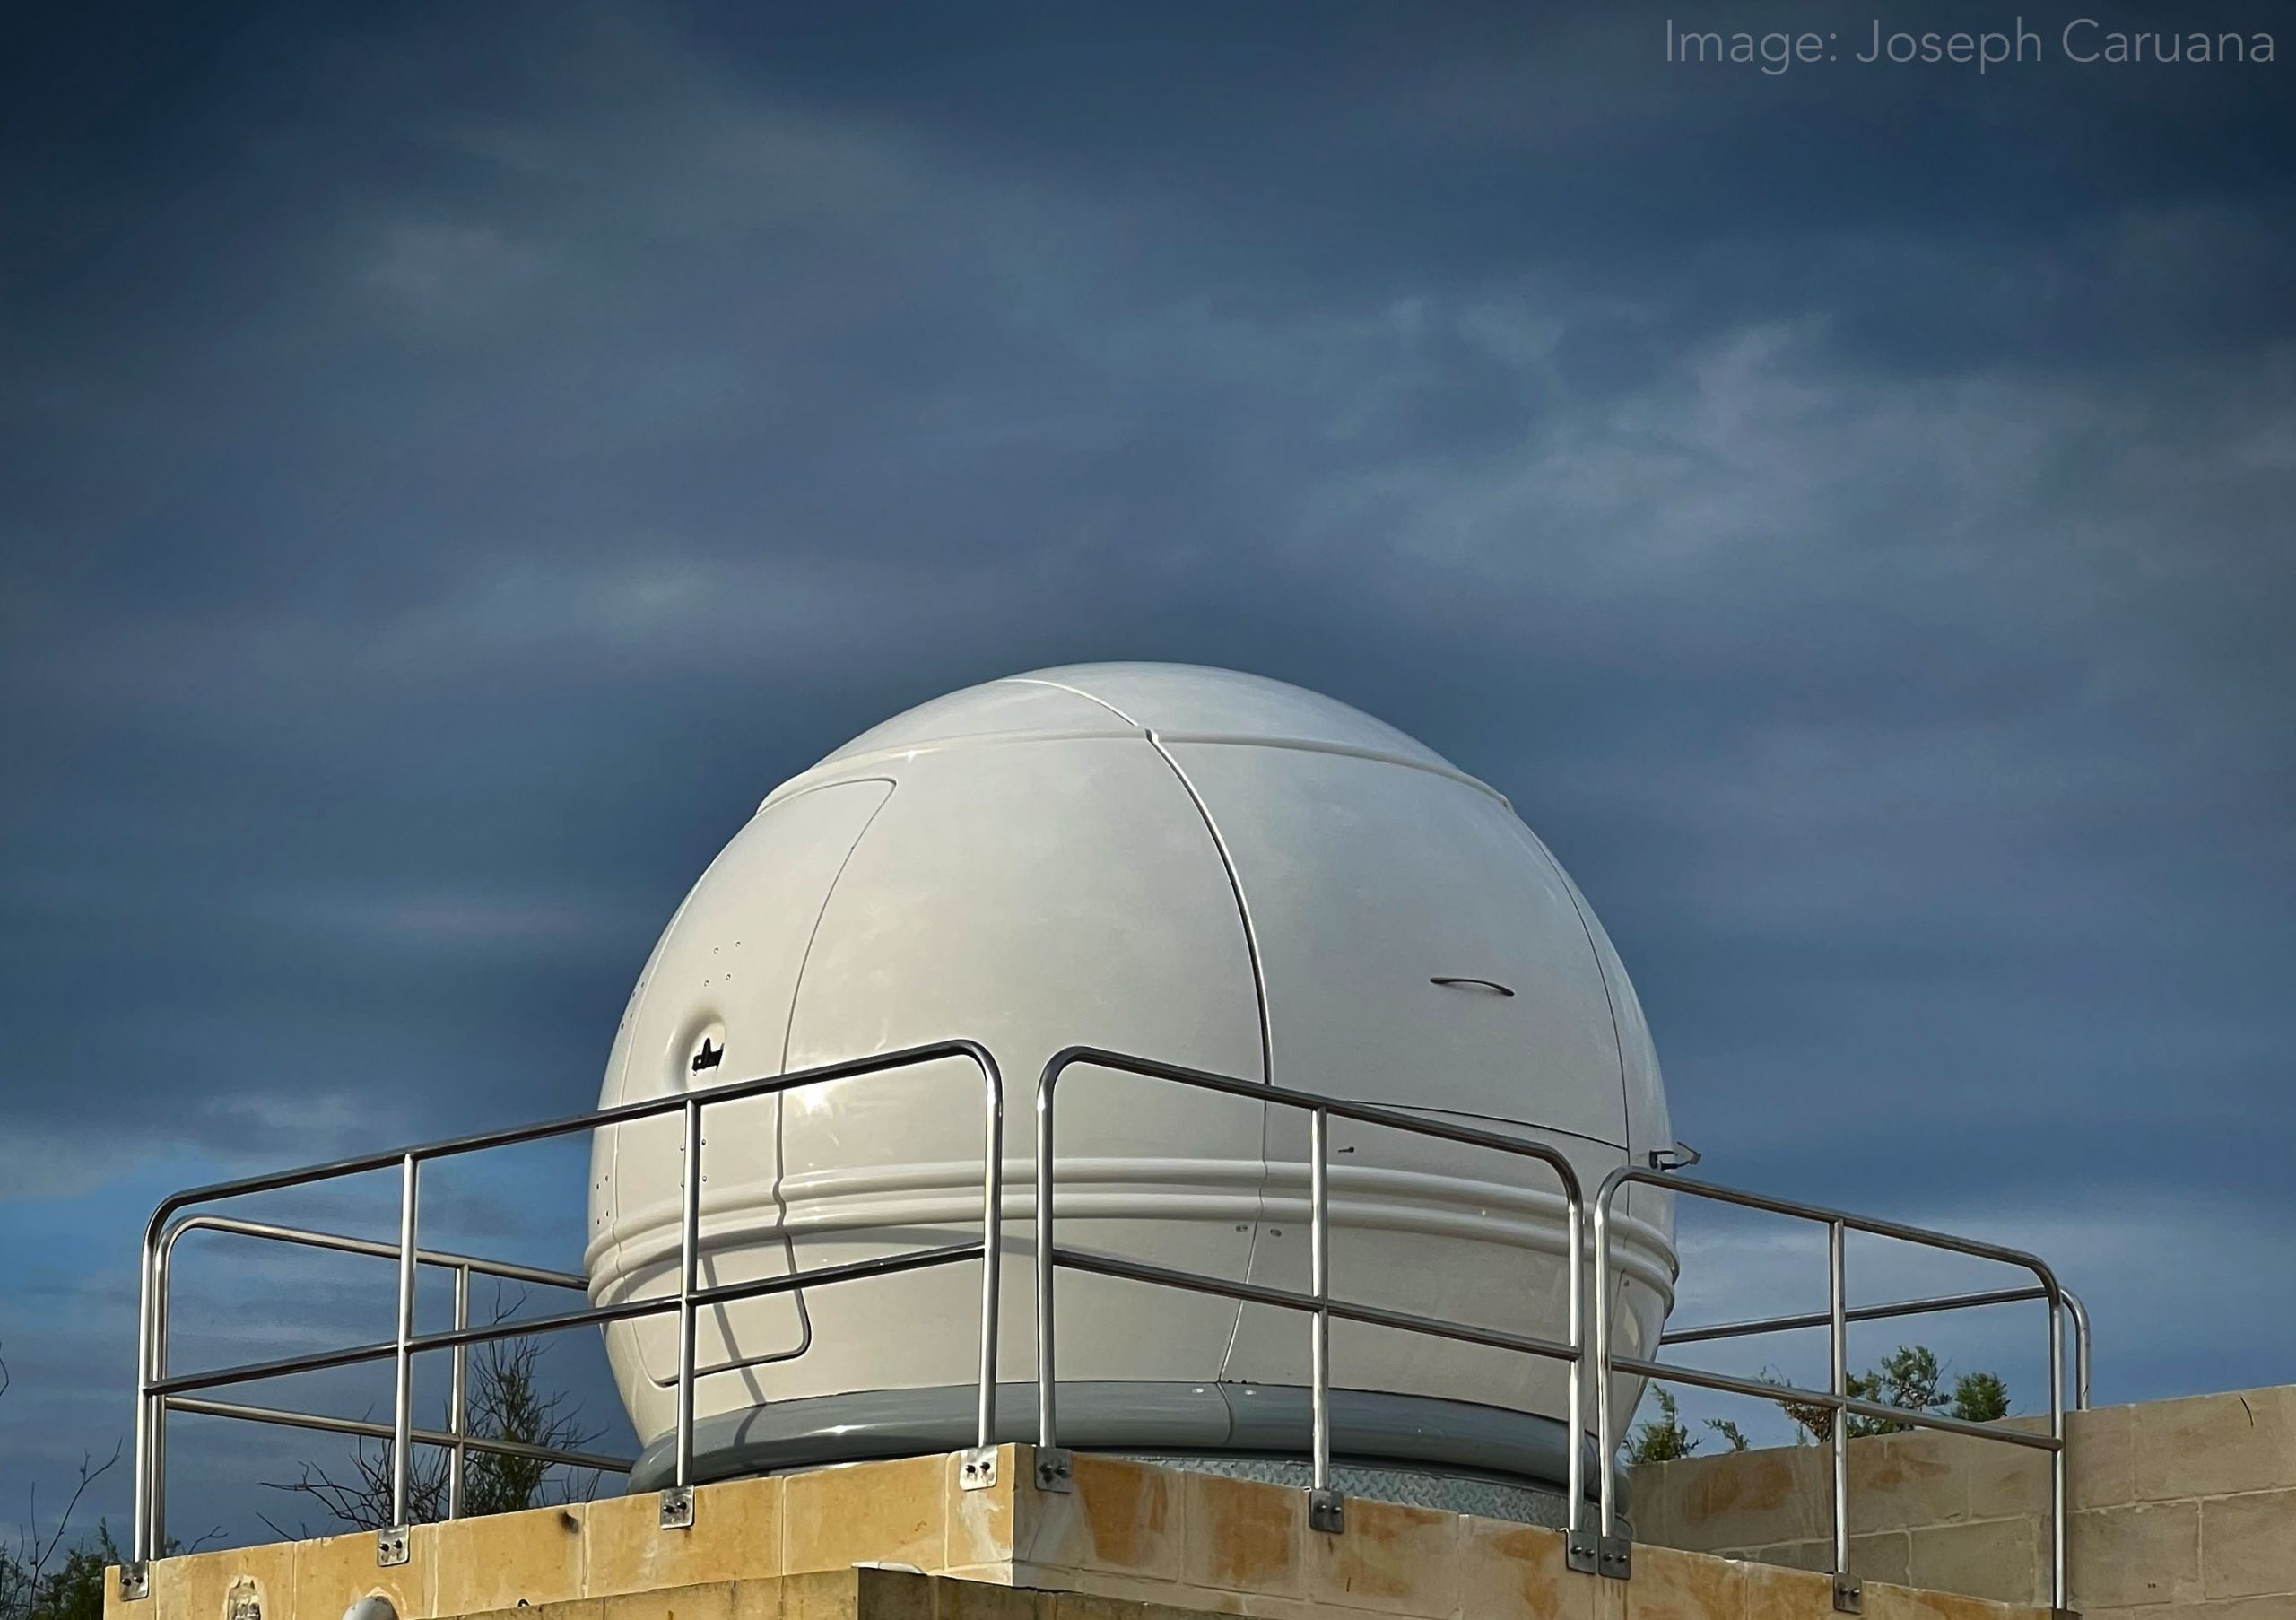 Malta’s first Astronomical Observatory